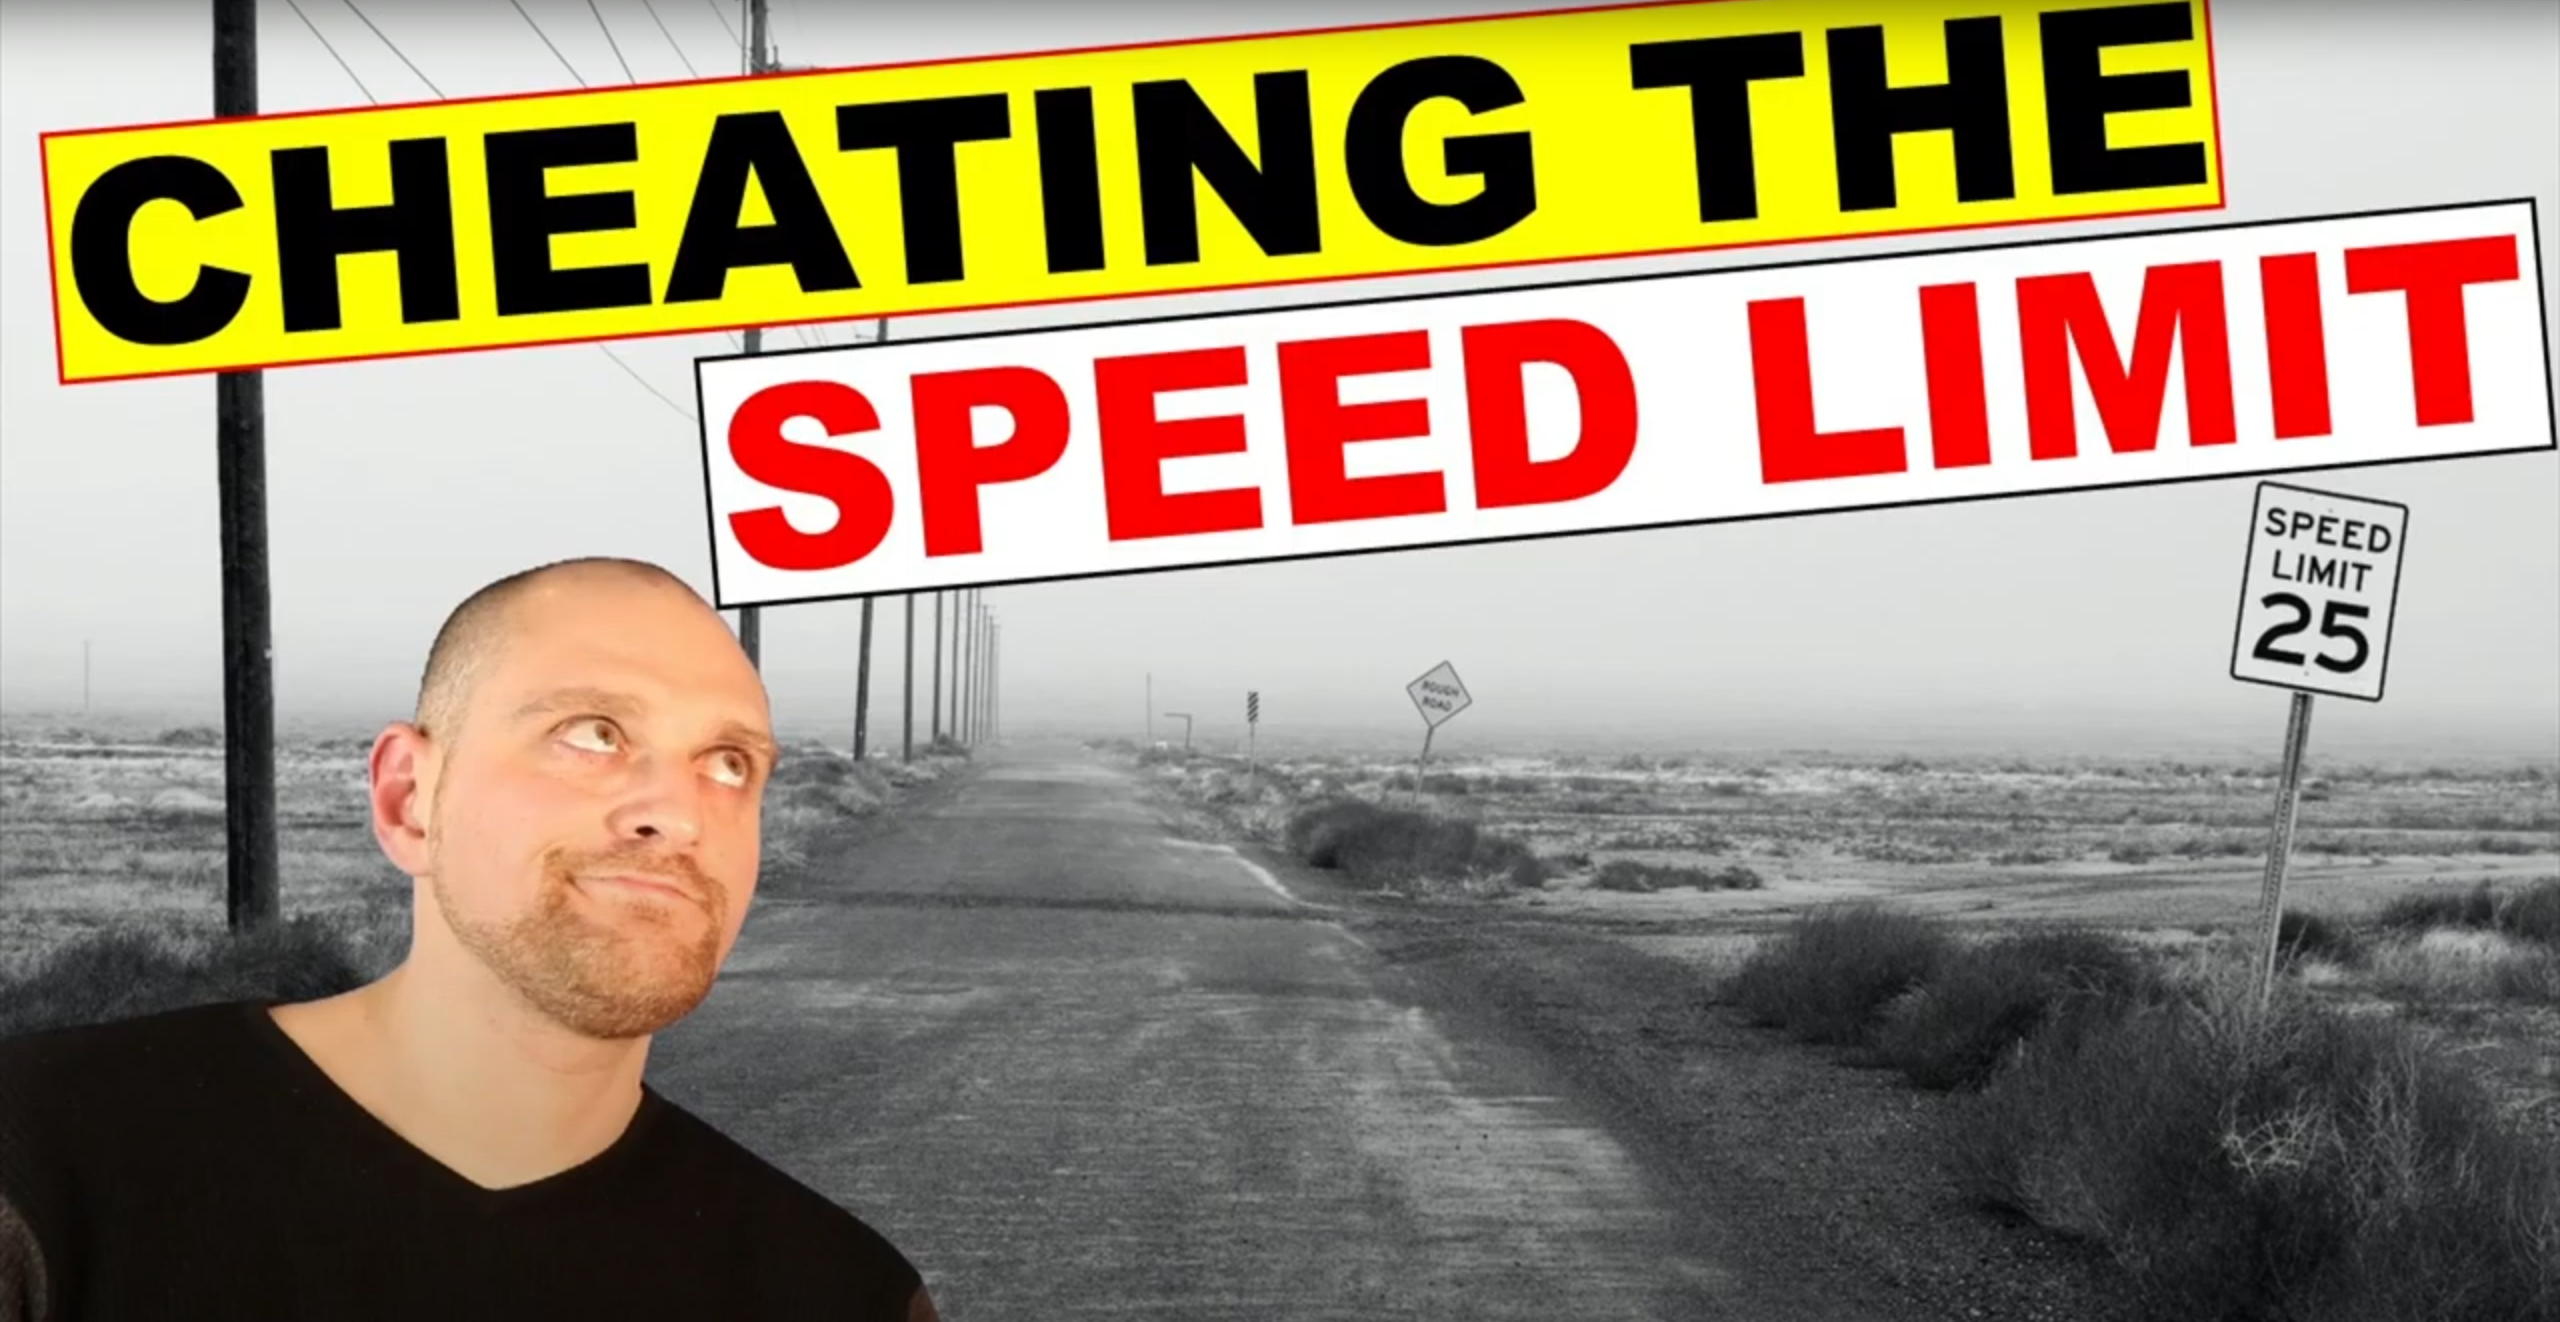 Cheating the speed limit – Safety Moment